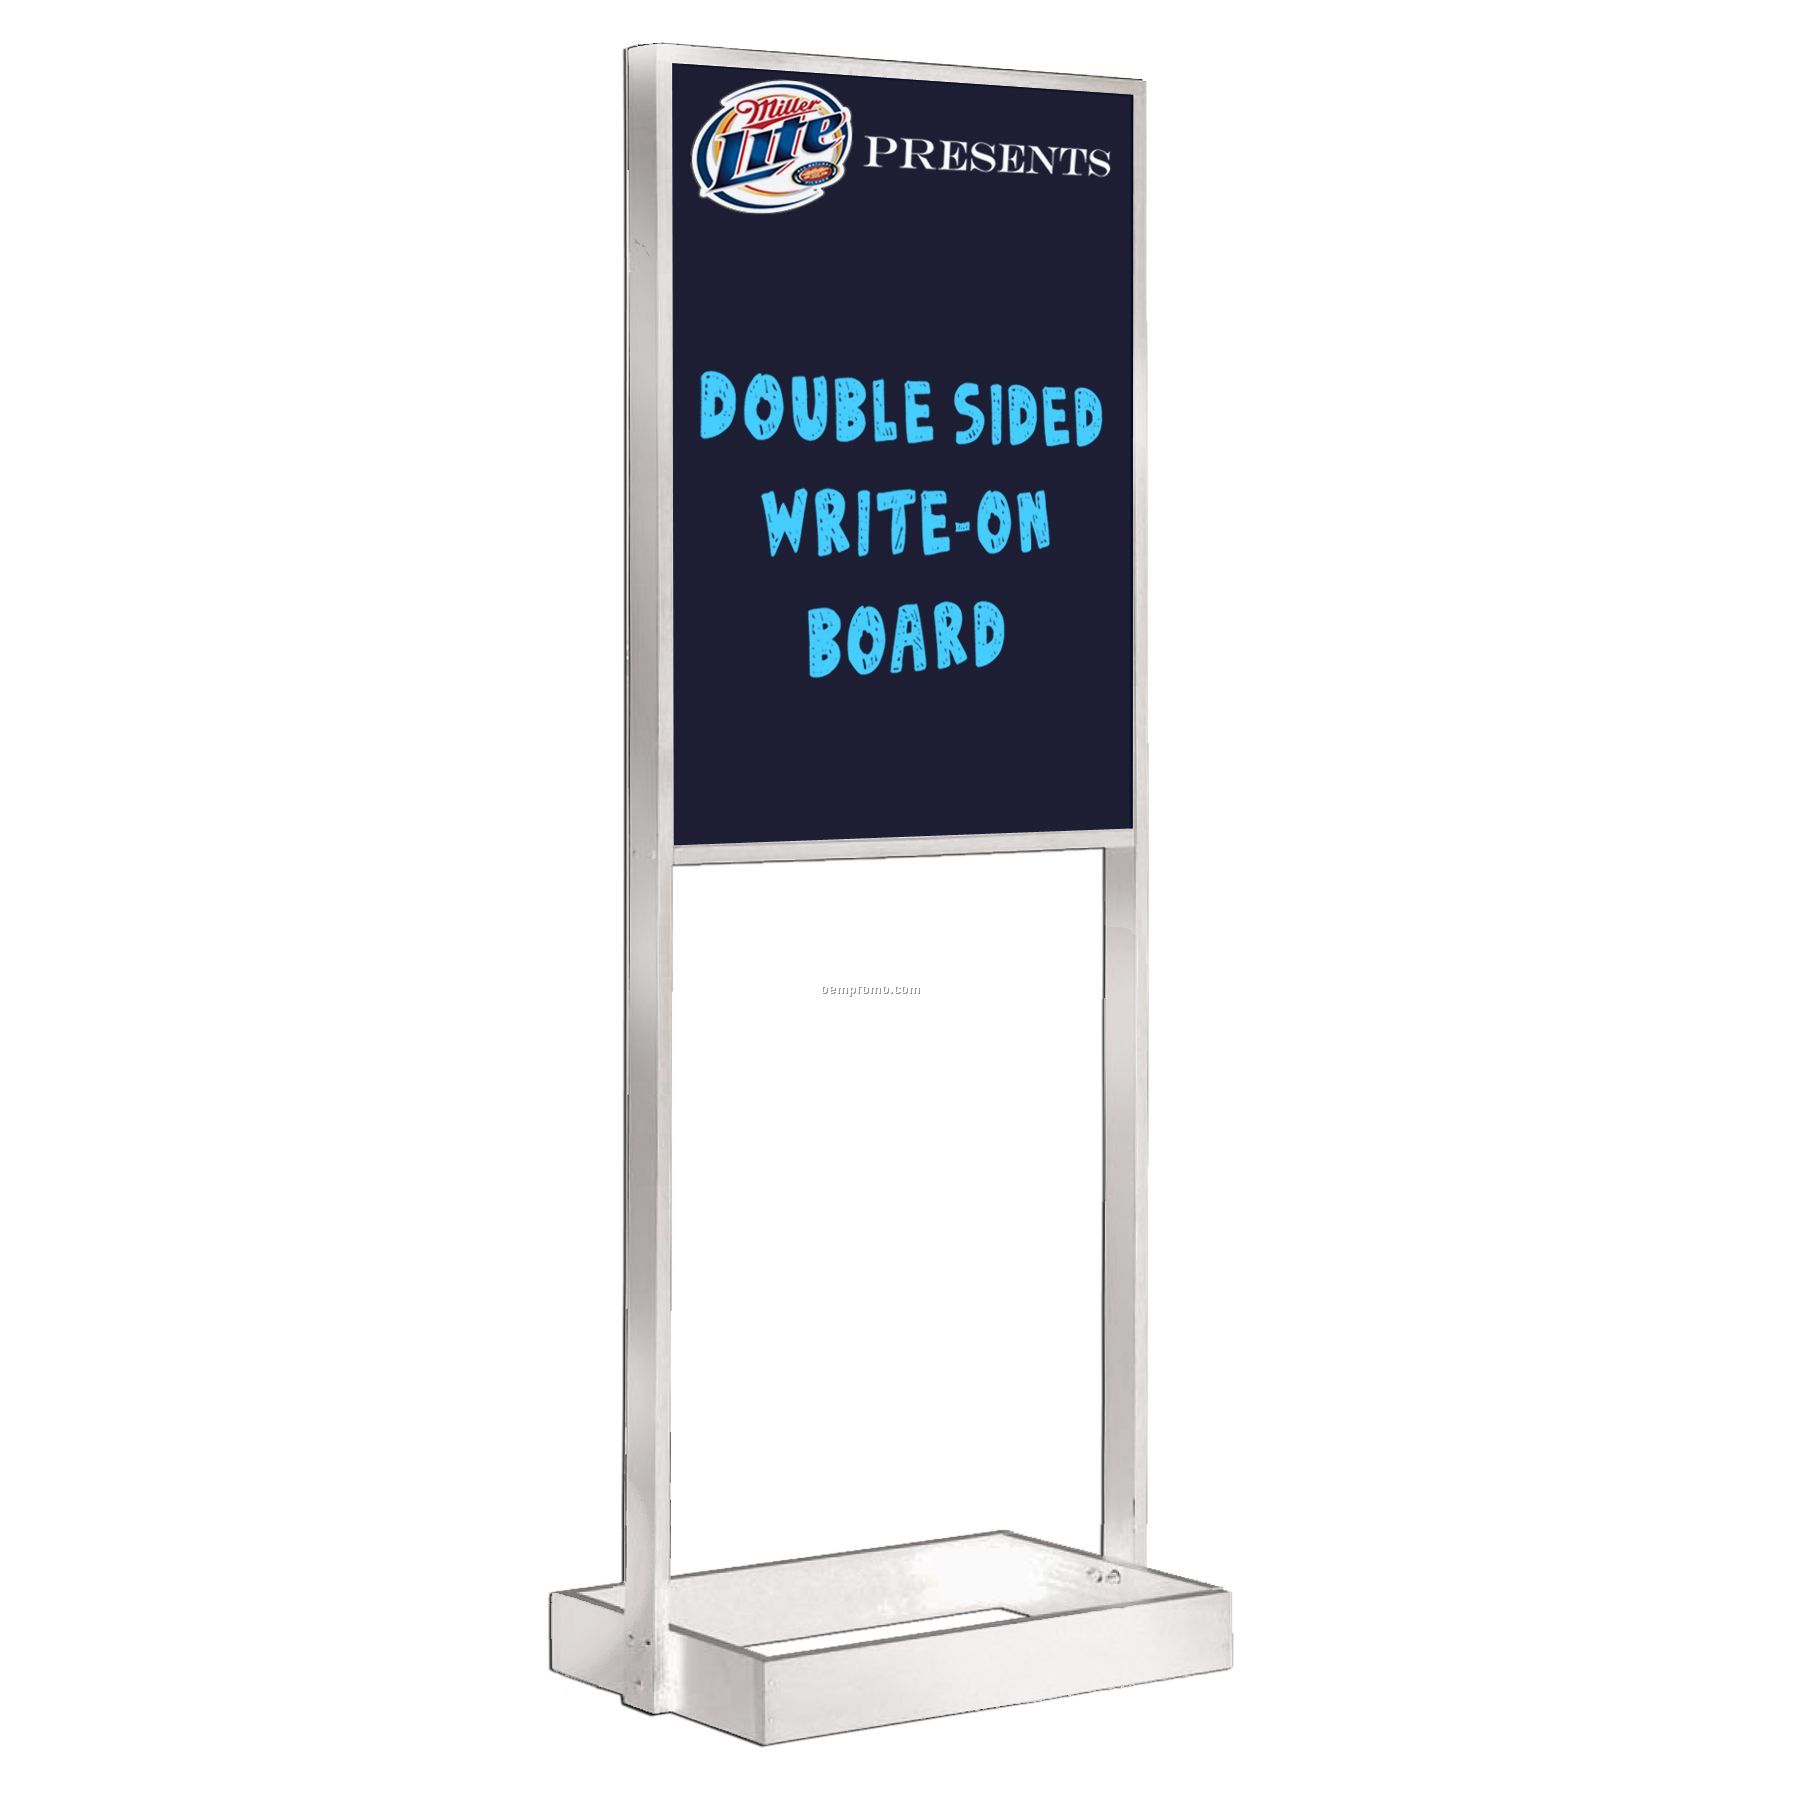 Double Faced Write-on Board W/ Chrome Floor Stand (25"X63")